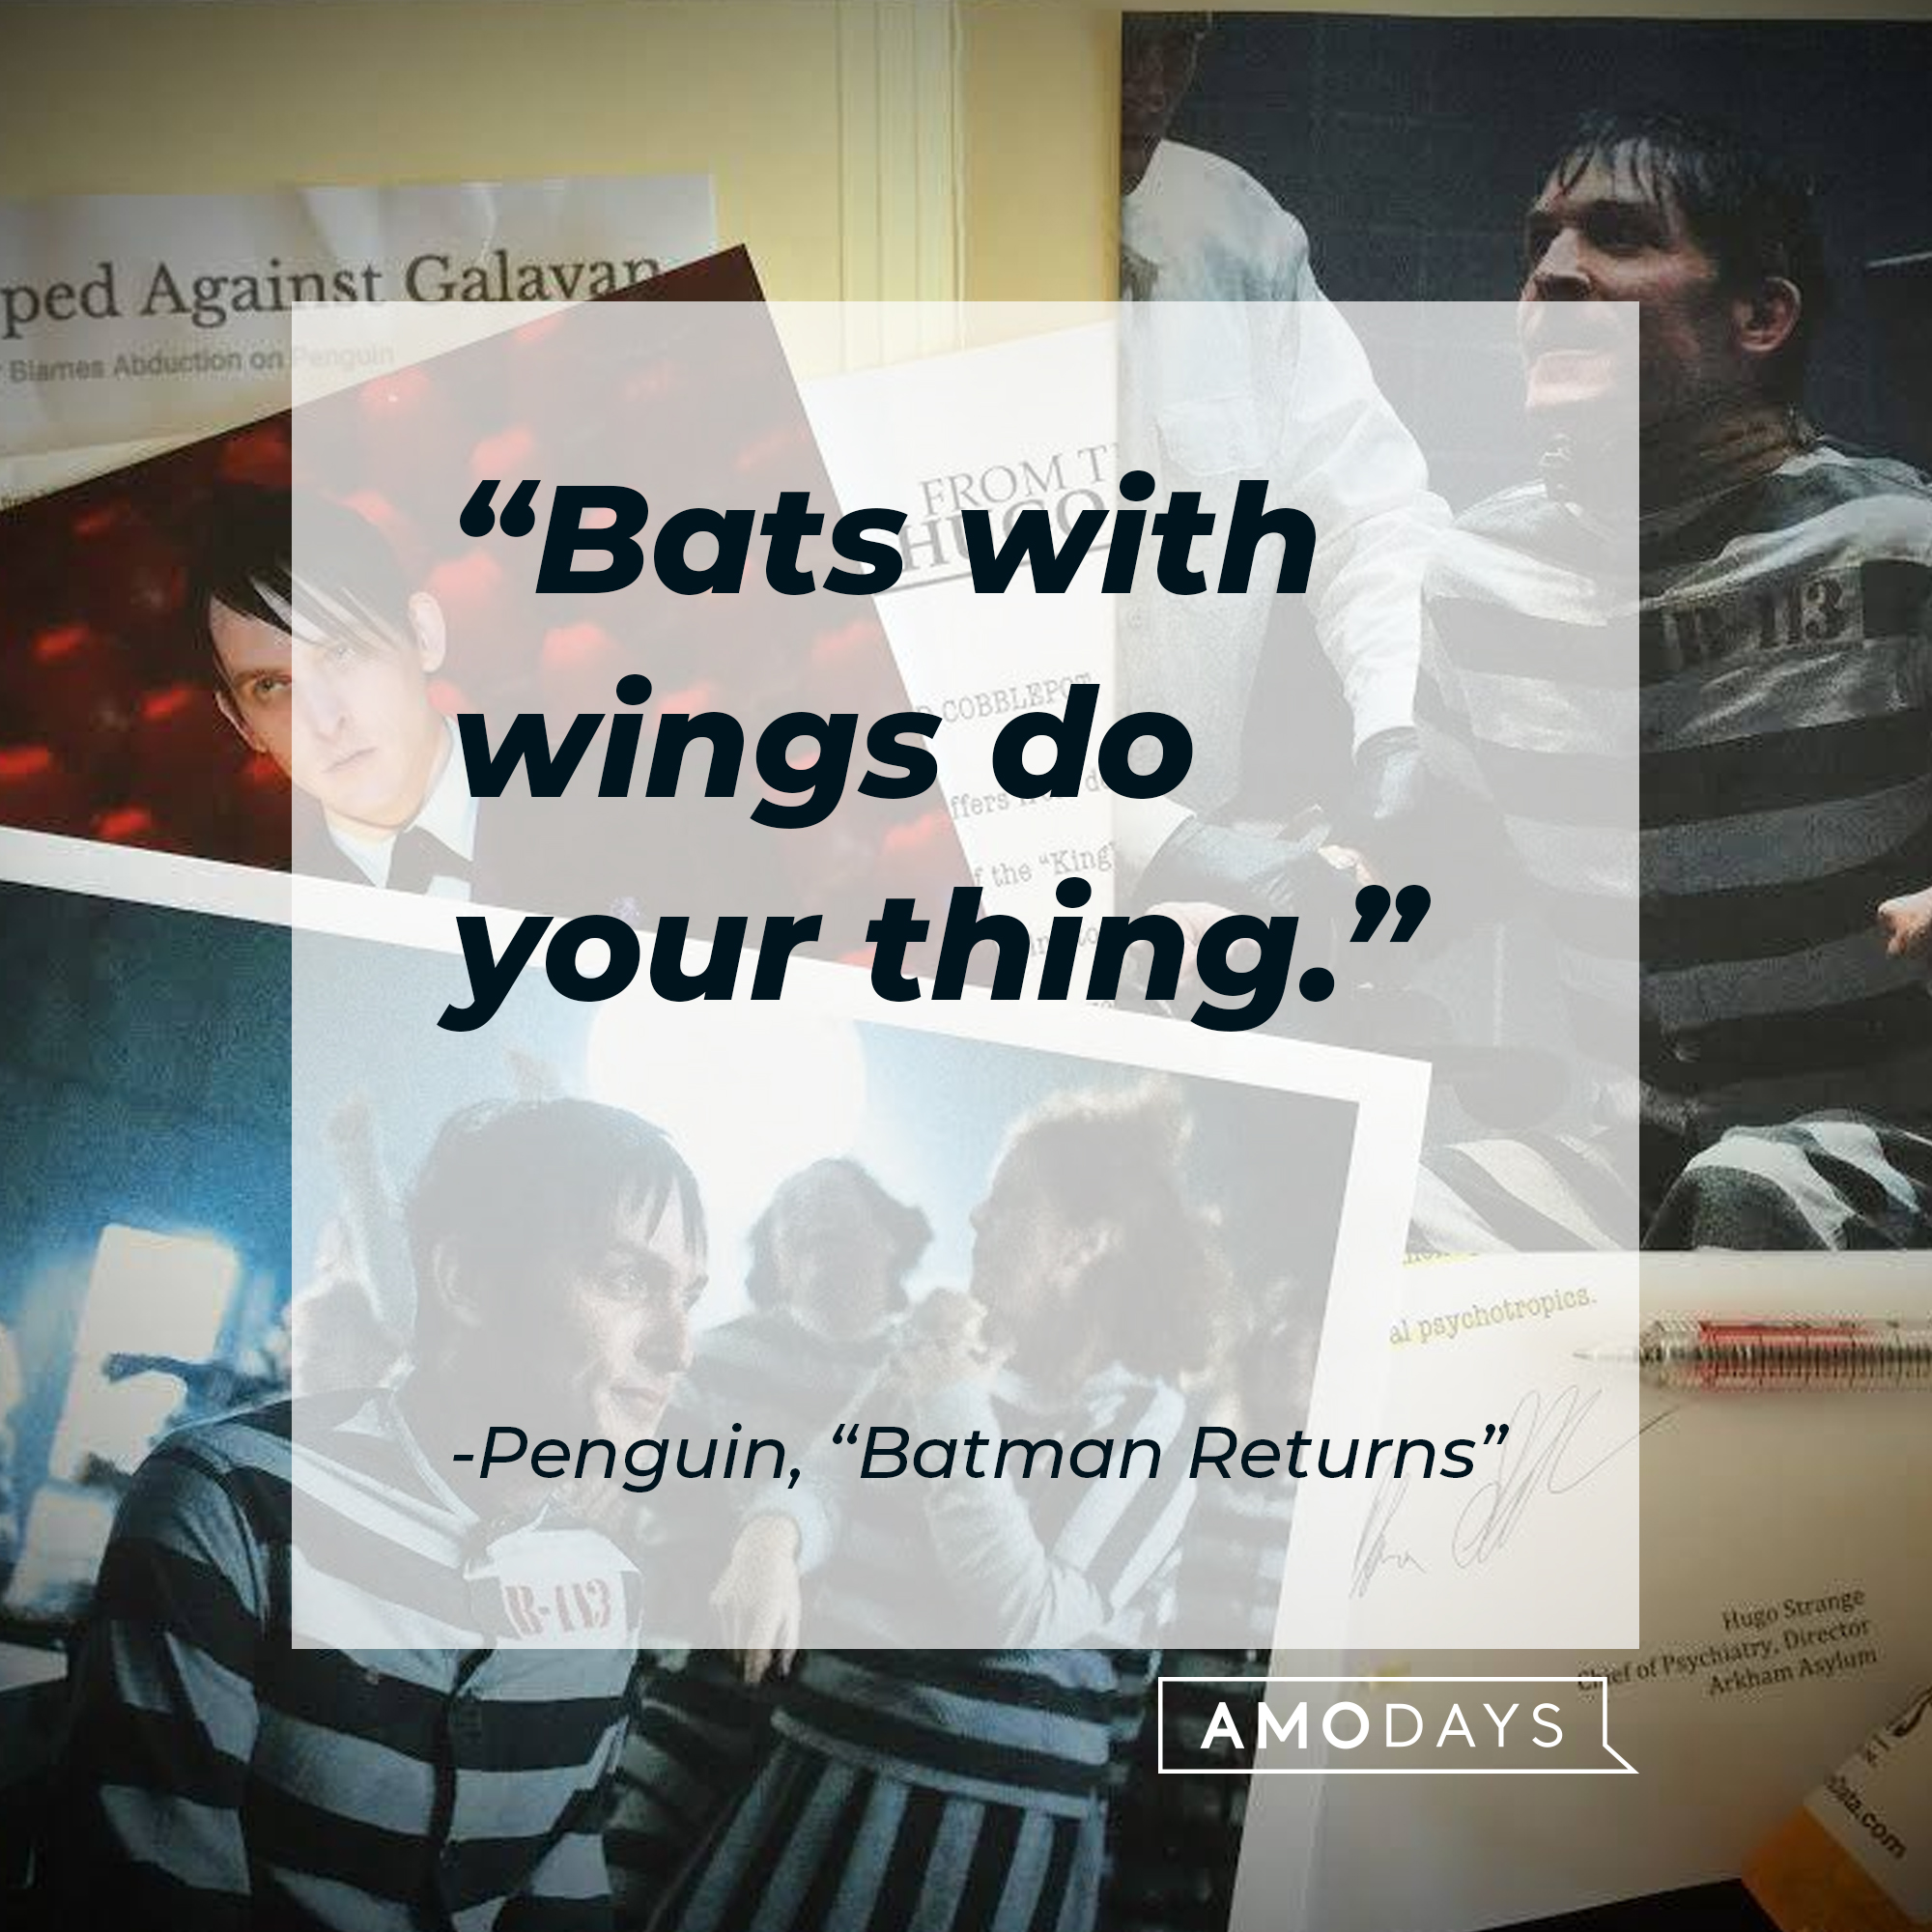 Penguin's quote from "Batman Returns" : "Bats with wings do your thing." | Source: facebook.com/BatmanReturnsFilm